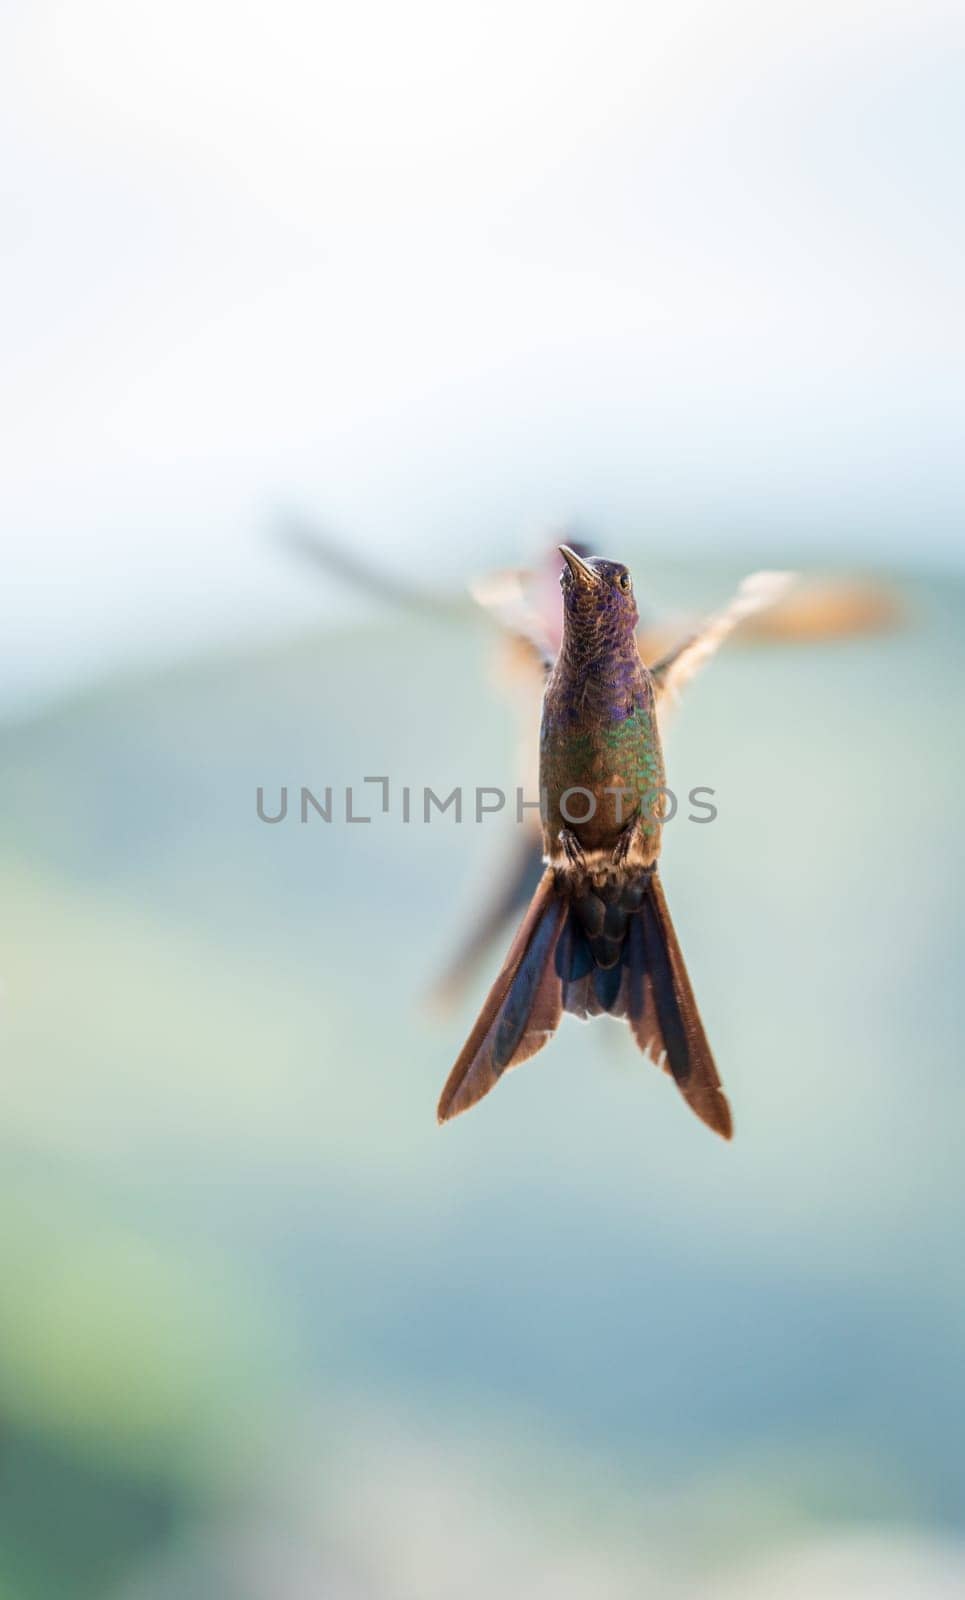 Magnificent close-up shot of a hummingbird flying with its wings extended and a blurred background, showcasing the beauty of nature's feathered creatures.